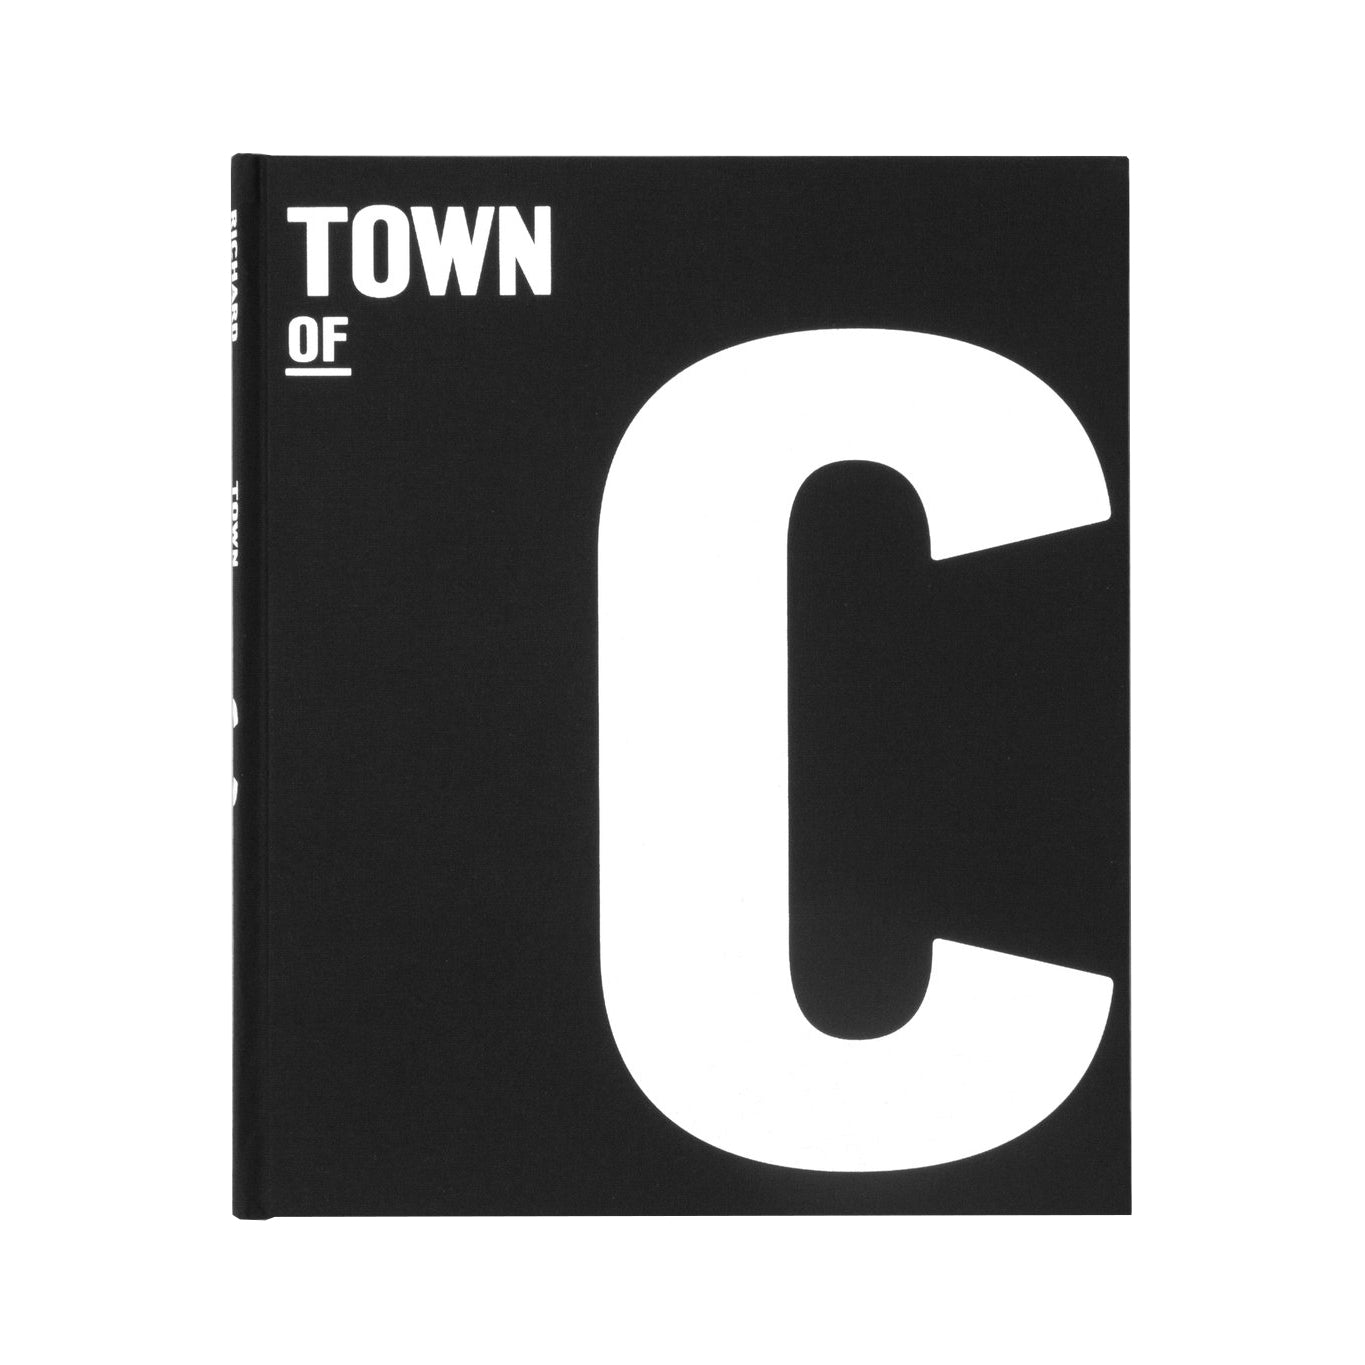 TOWN OF C